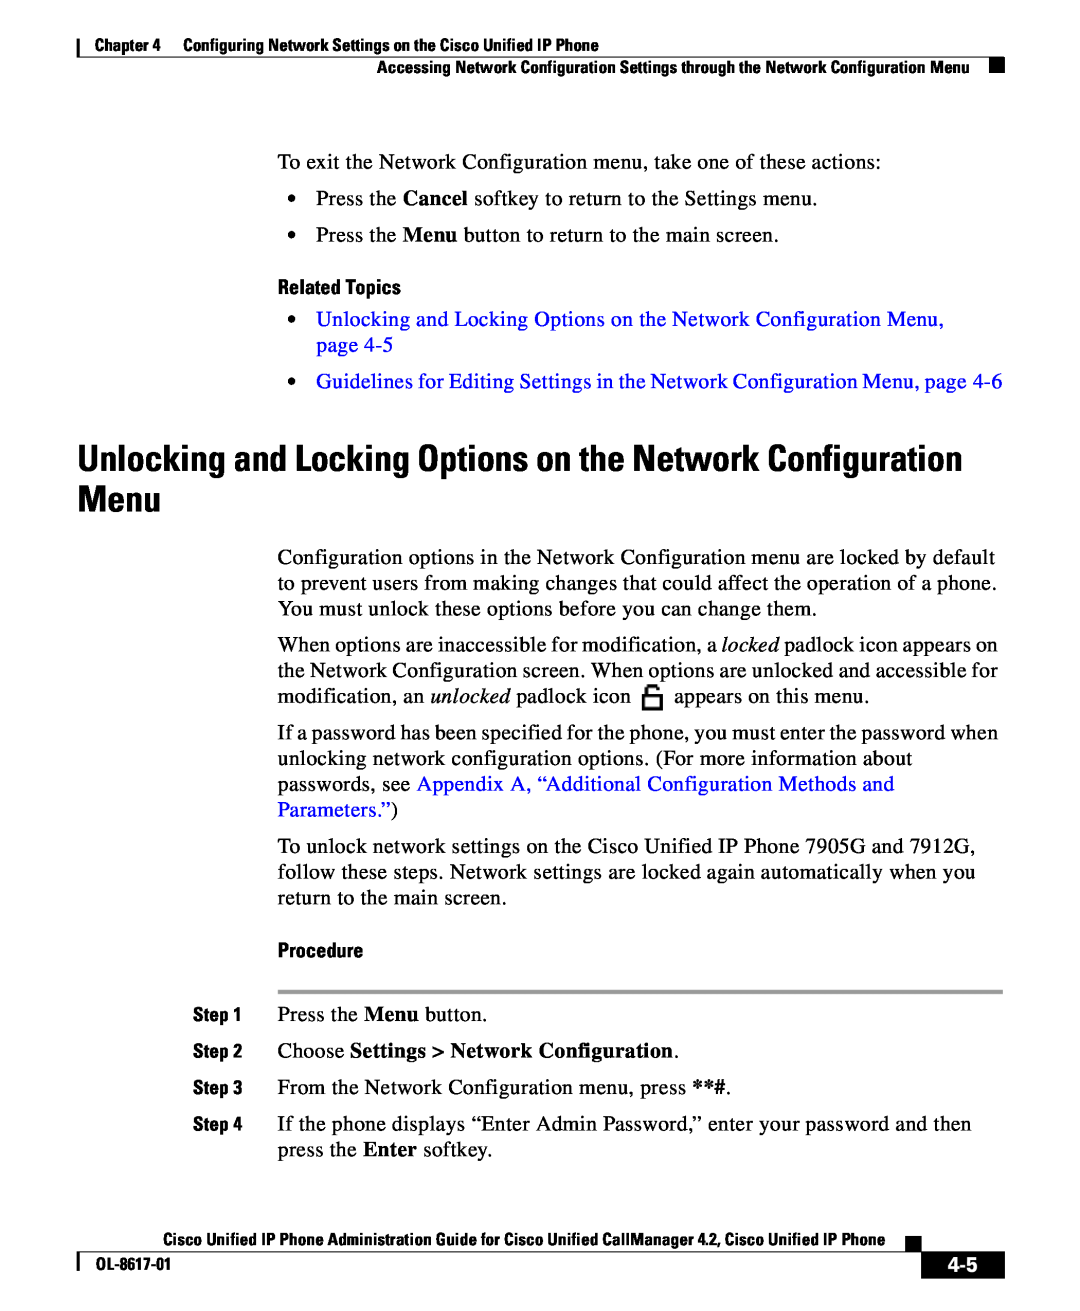 Cisco Systems 4.2 manual Unlocking and Locking Options on the Network Configuration Menu, Related Topics, Procedure 